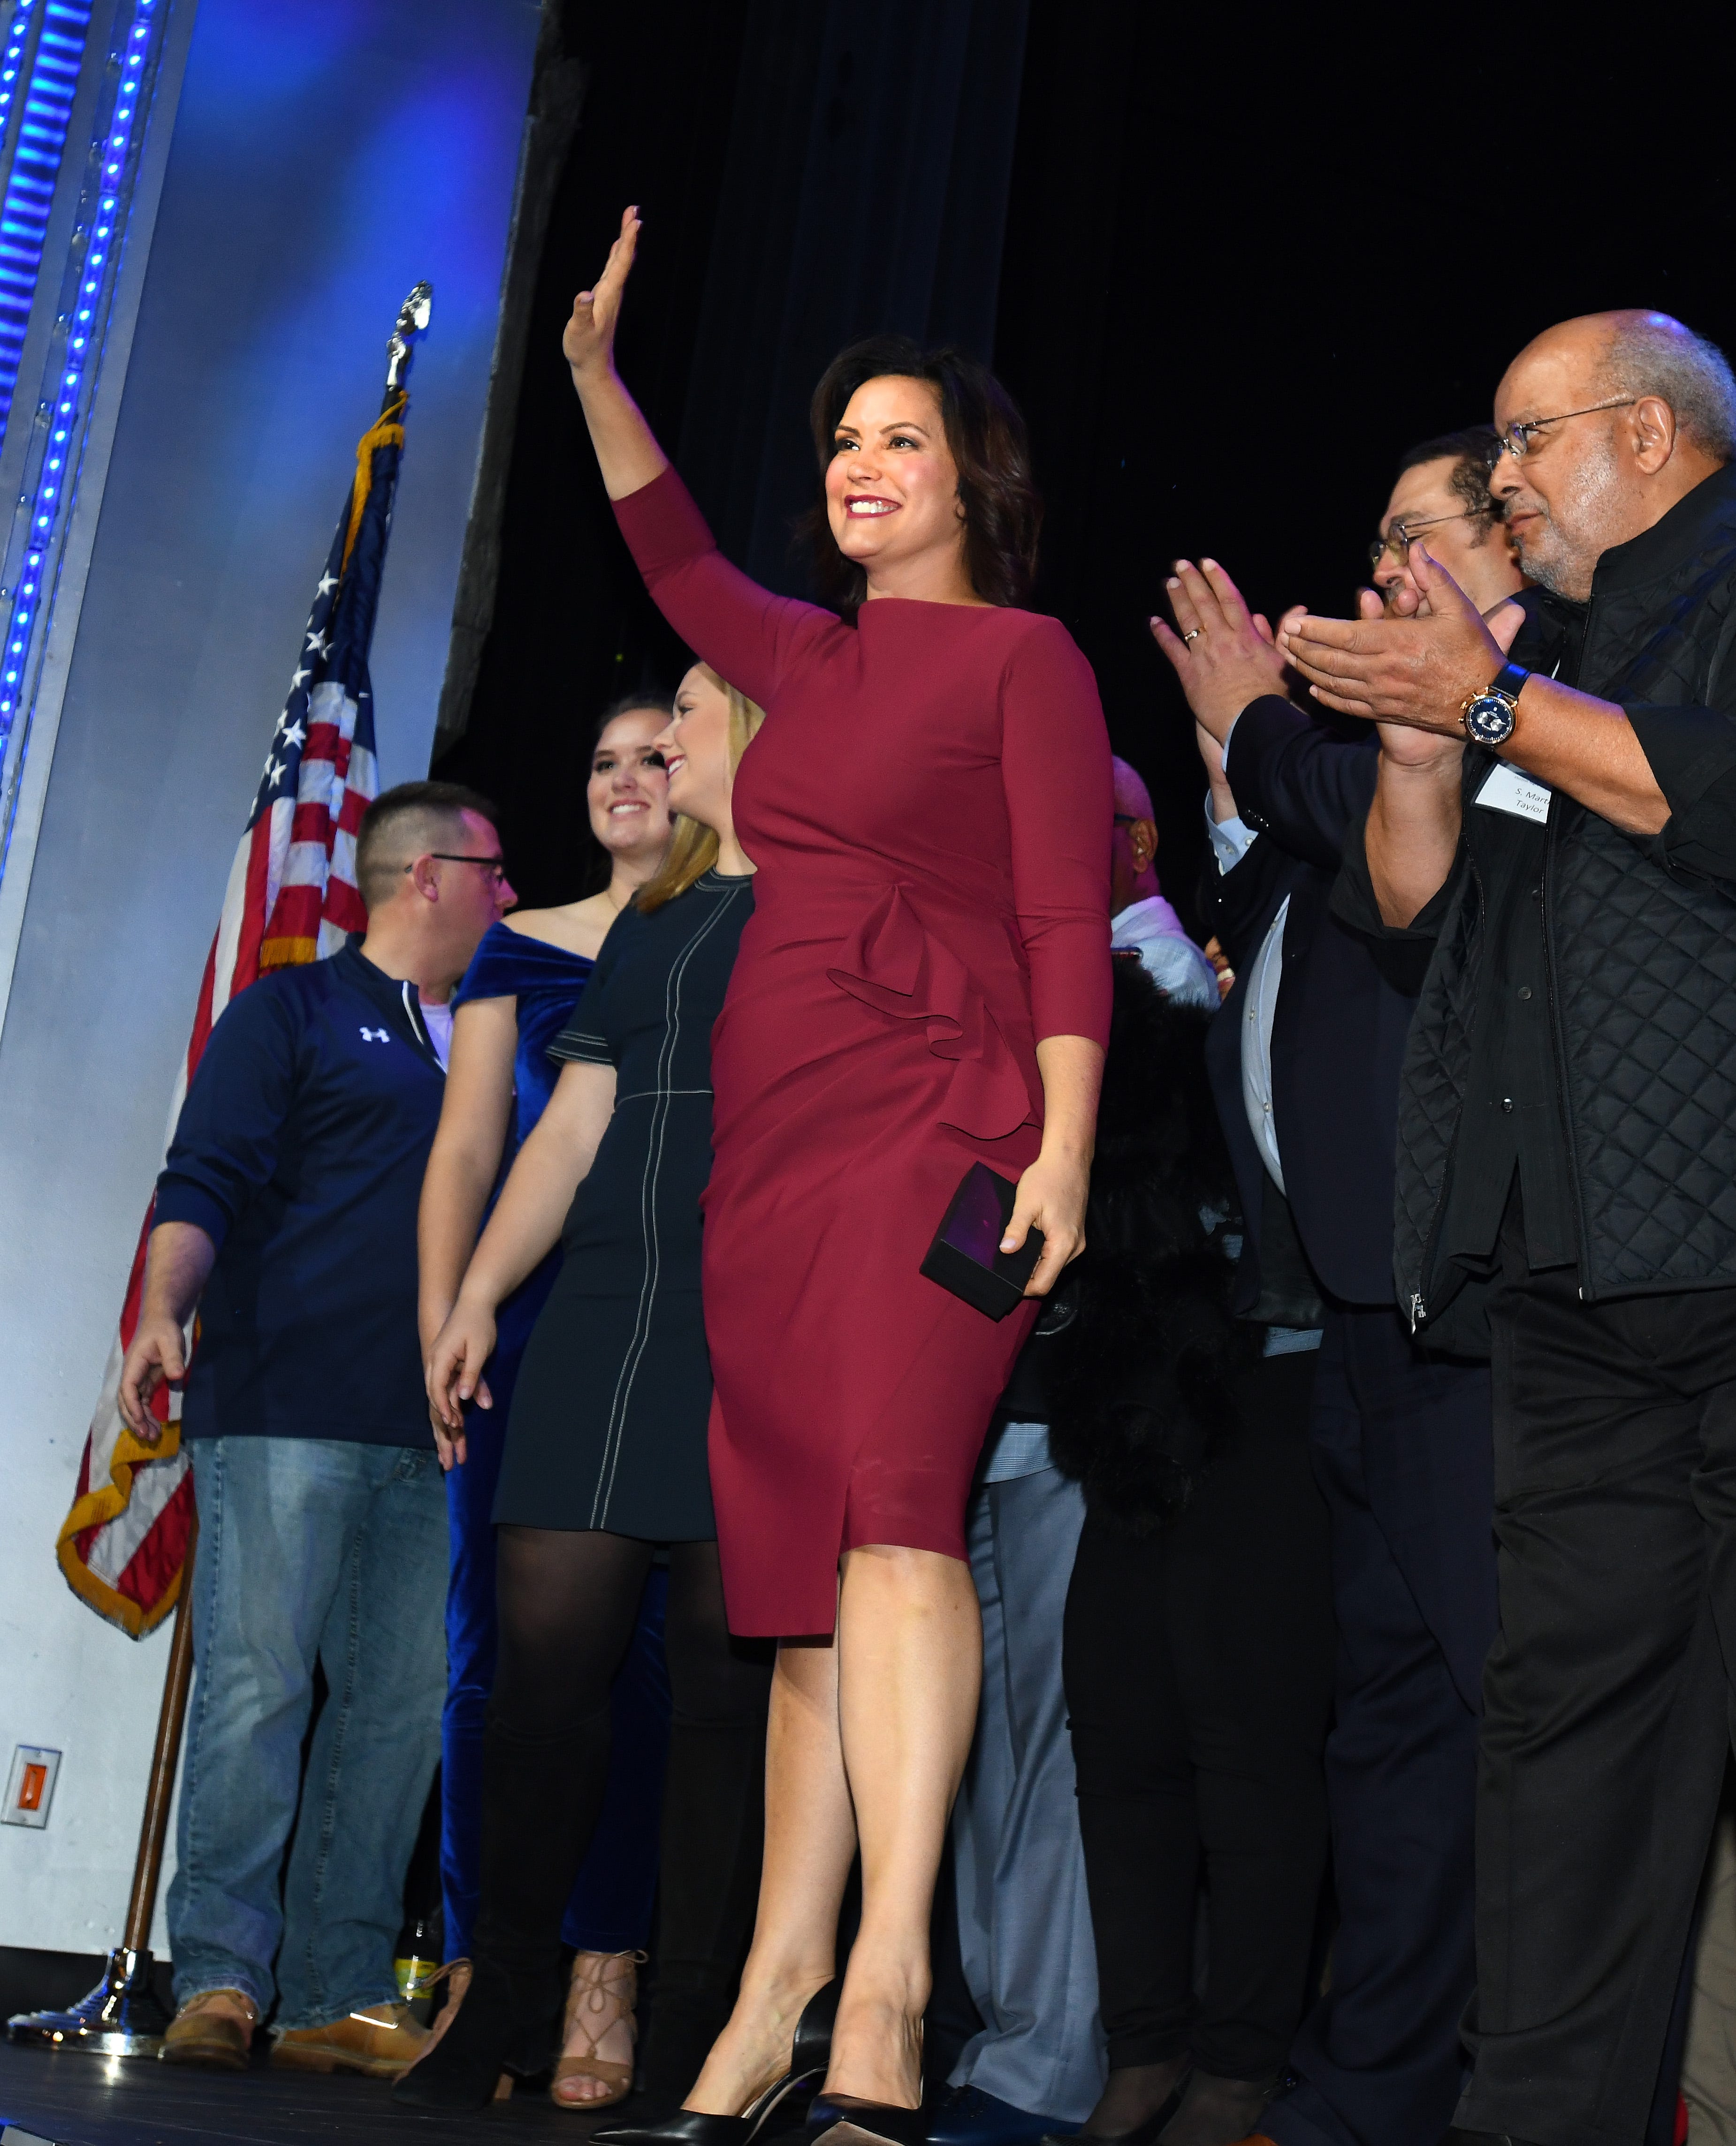 Michigan governor-elect Gretchen Whitmer waves to her supporters with other Democratic Party candidates at the Sound Board theater in the MotorCity Casino in Detroit, Tuesday night.